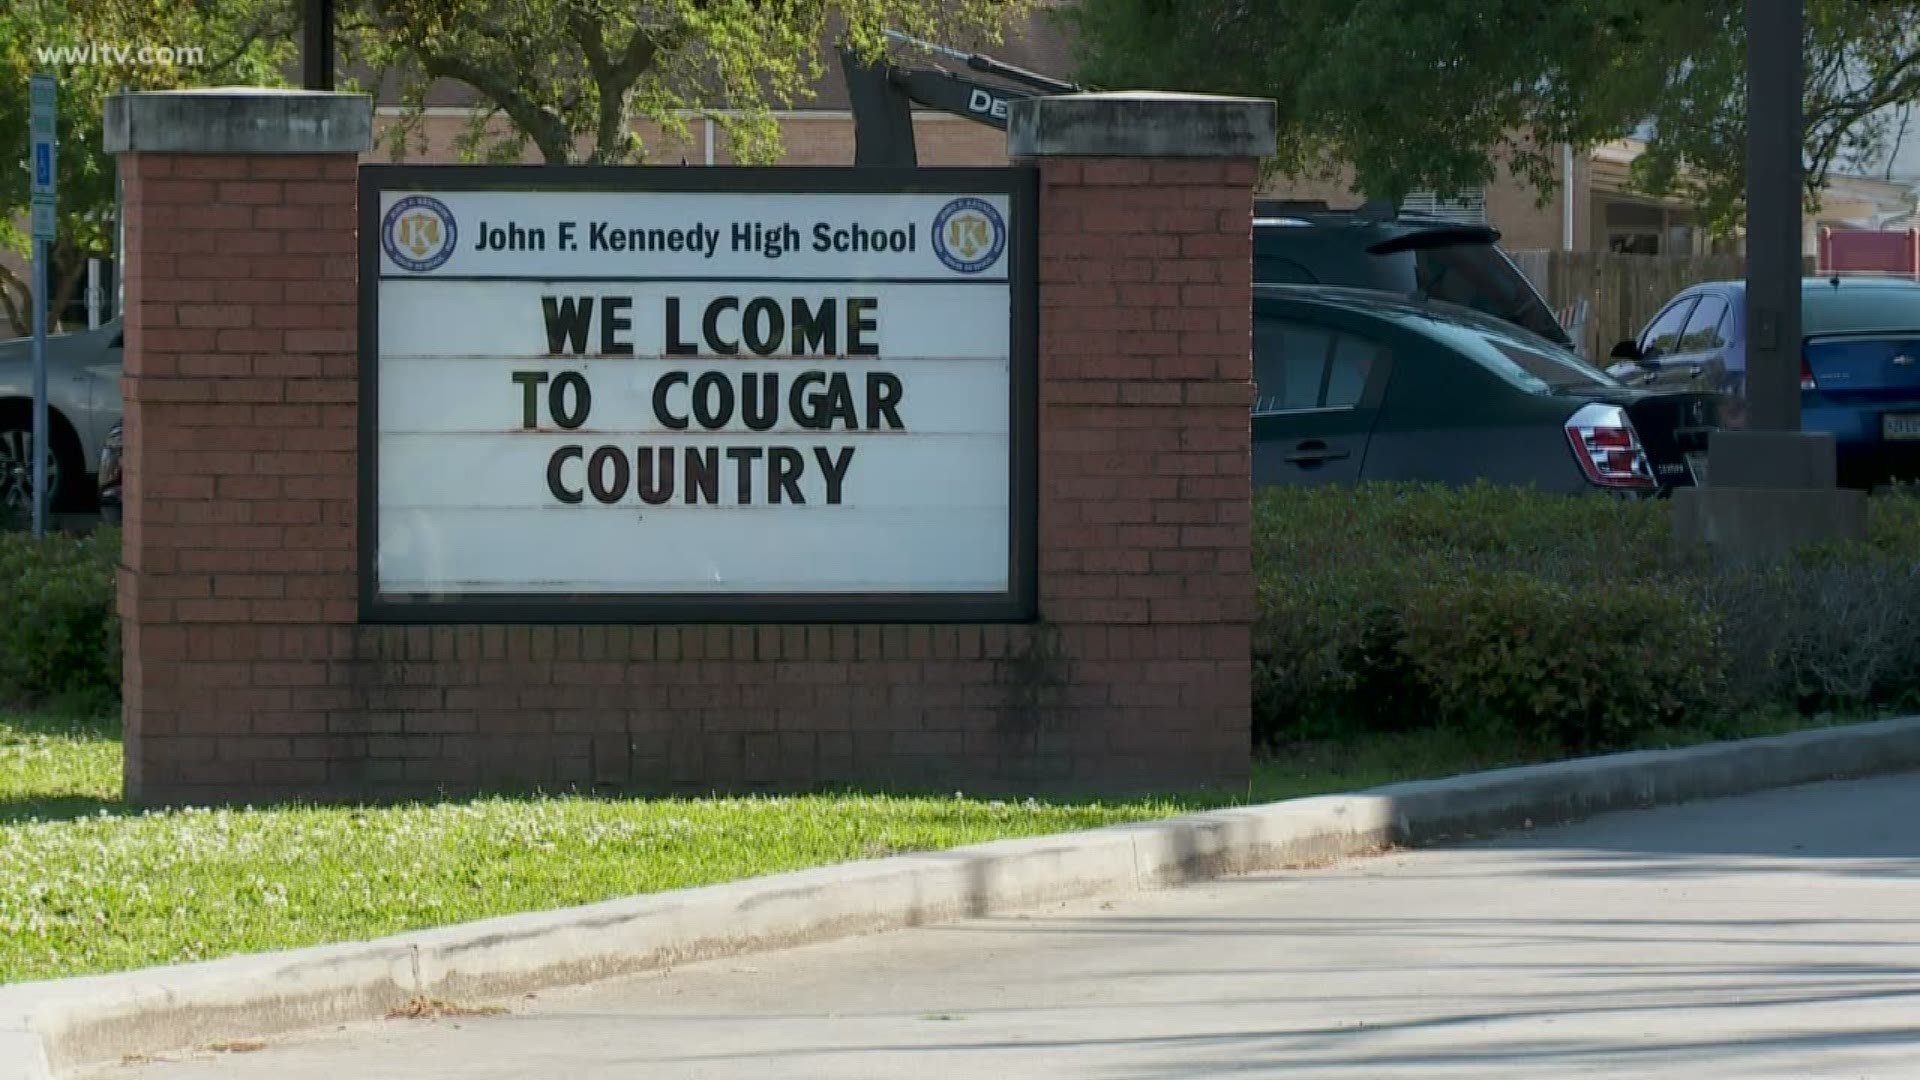 Law enforcement agencies are looking into the alleged malfeasance and misconduct at Kennedy High School that’s prevented half the 2019 senior class from graduating on time, the chairman of the charter board that runs the school confirmed Tuesday.